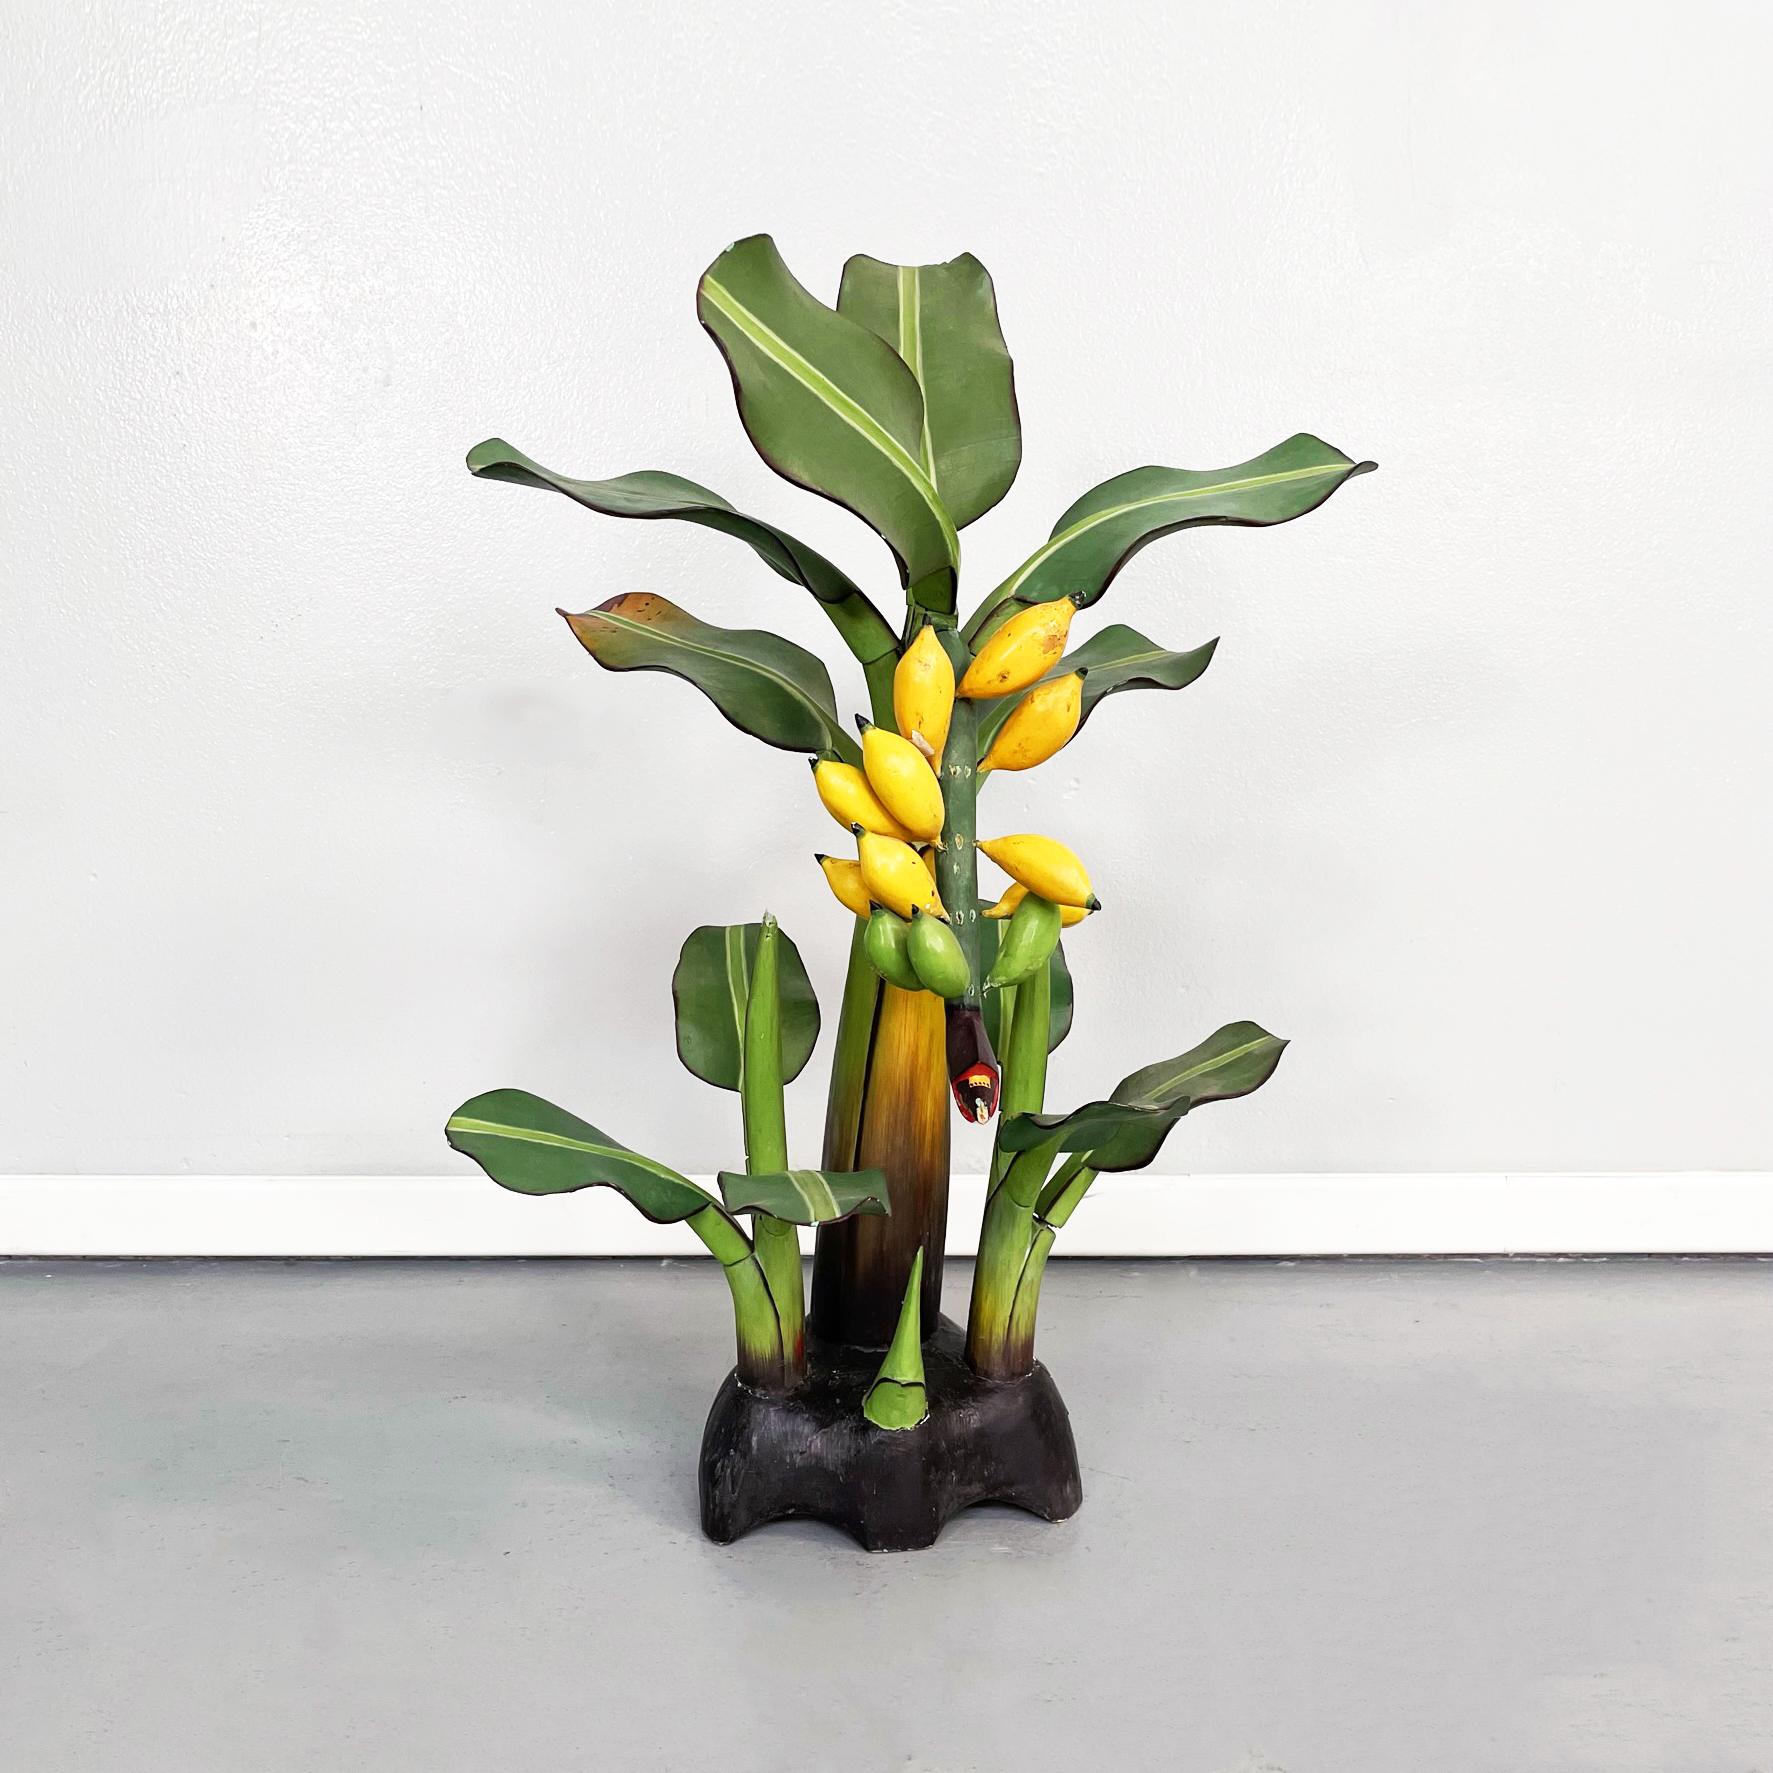 Italian Mid-Century Modern Wooden sculpture of a banana plant, 1950s
Sculpture of a banana plant in carved wood with interlocking leaves. Hand crafted and painted.
1950s.
Good conditions. In some places the color is missing. Two leaves are